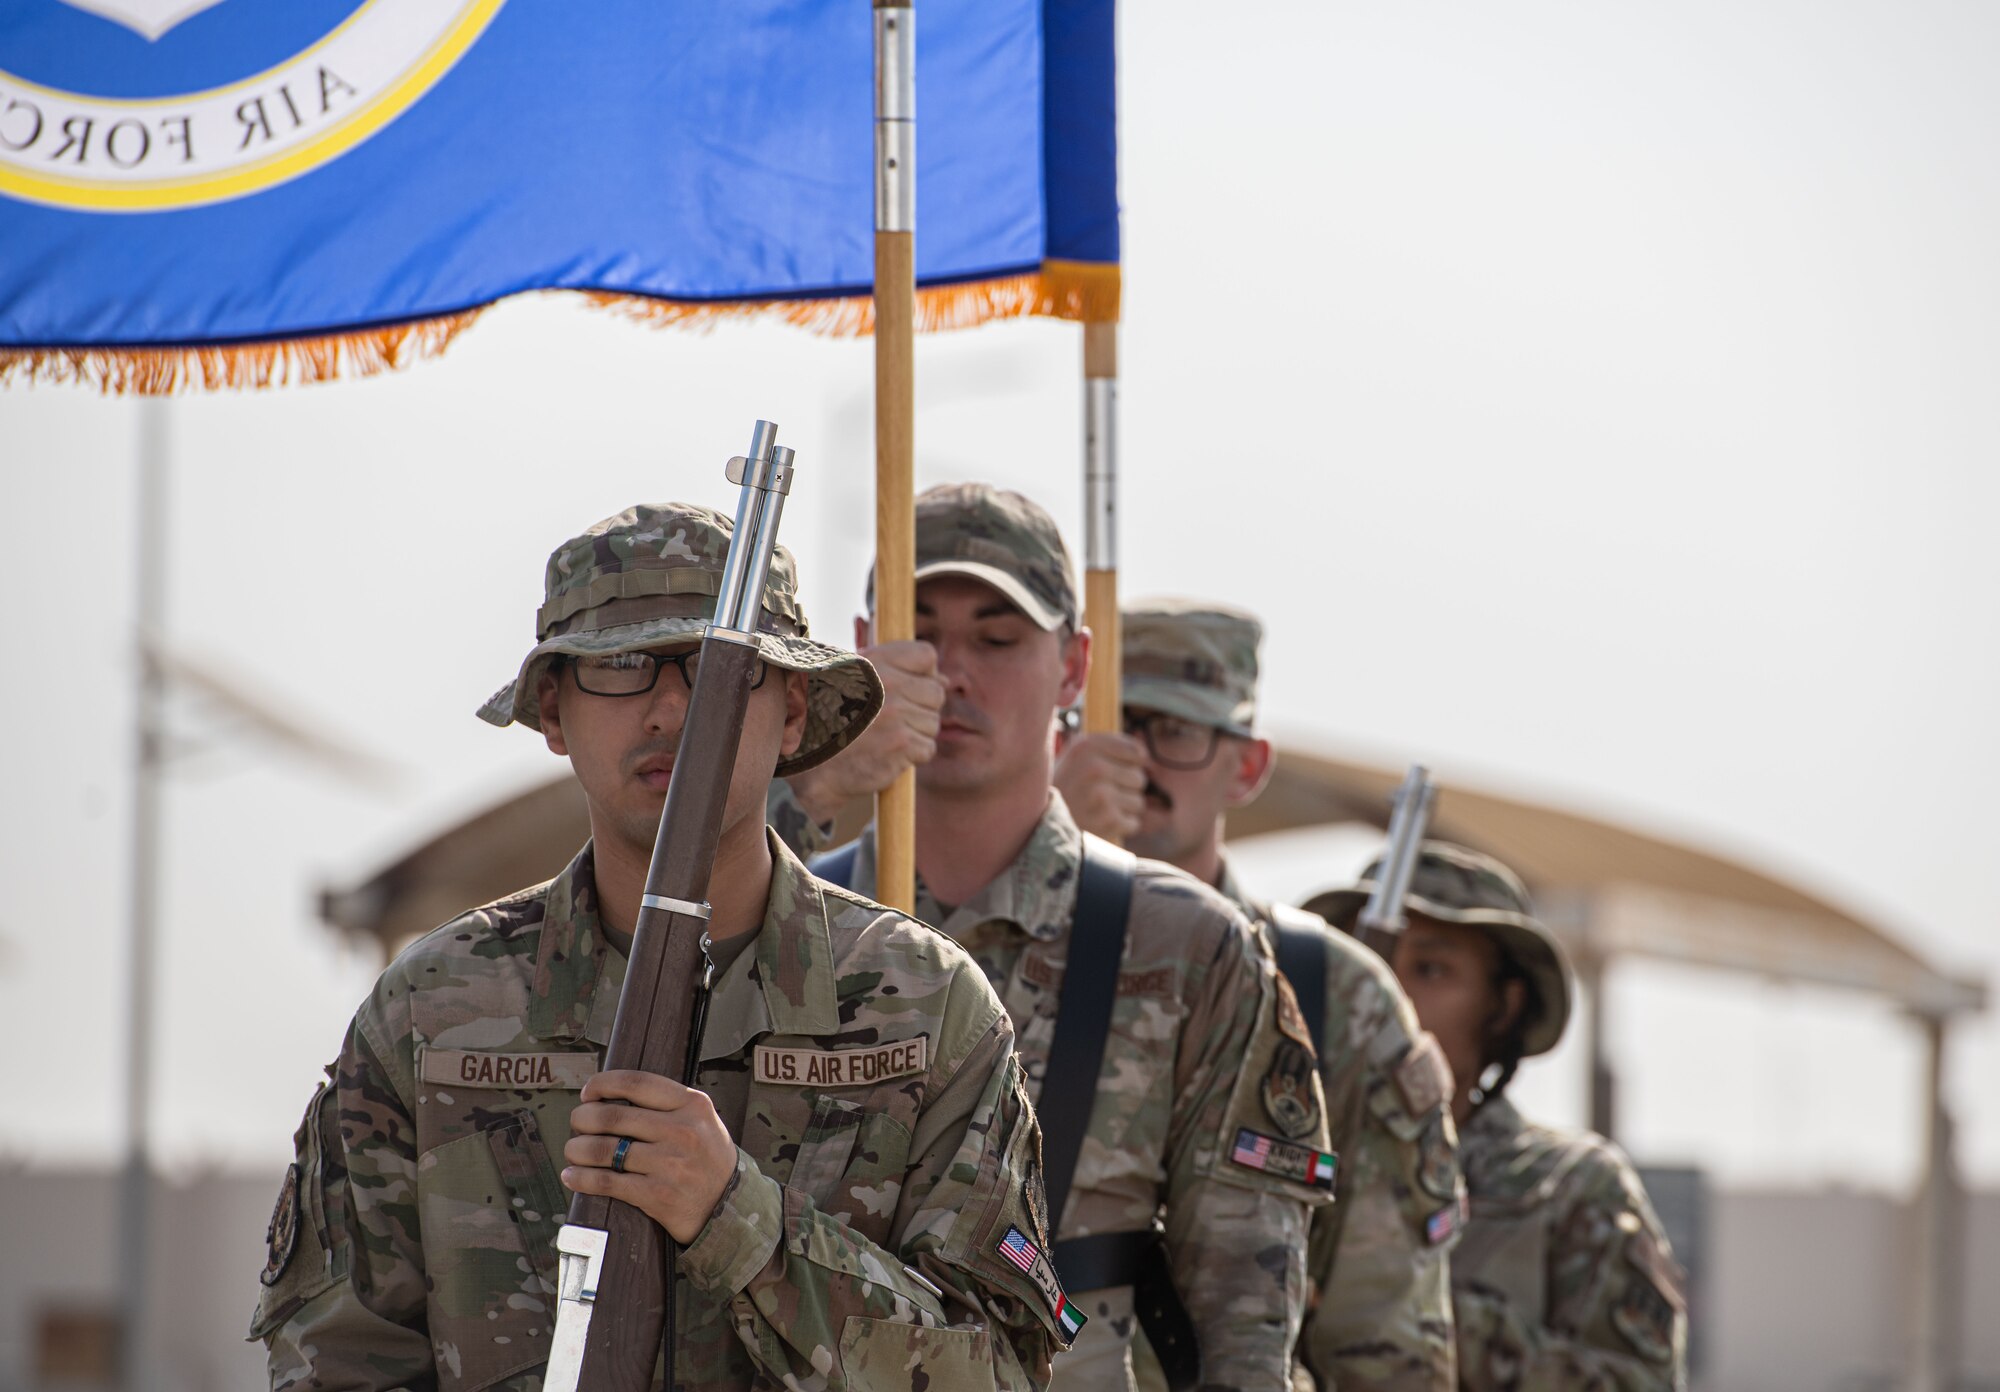 A photo of the honor guard marching.